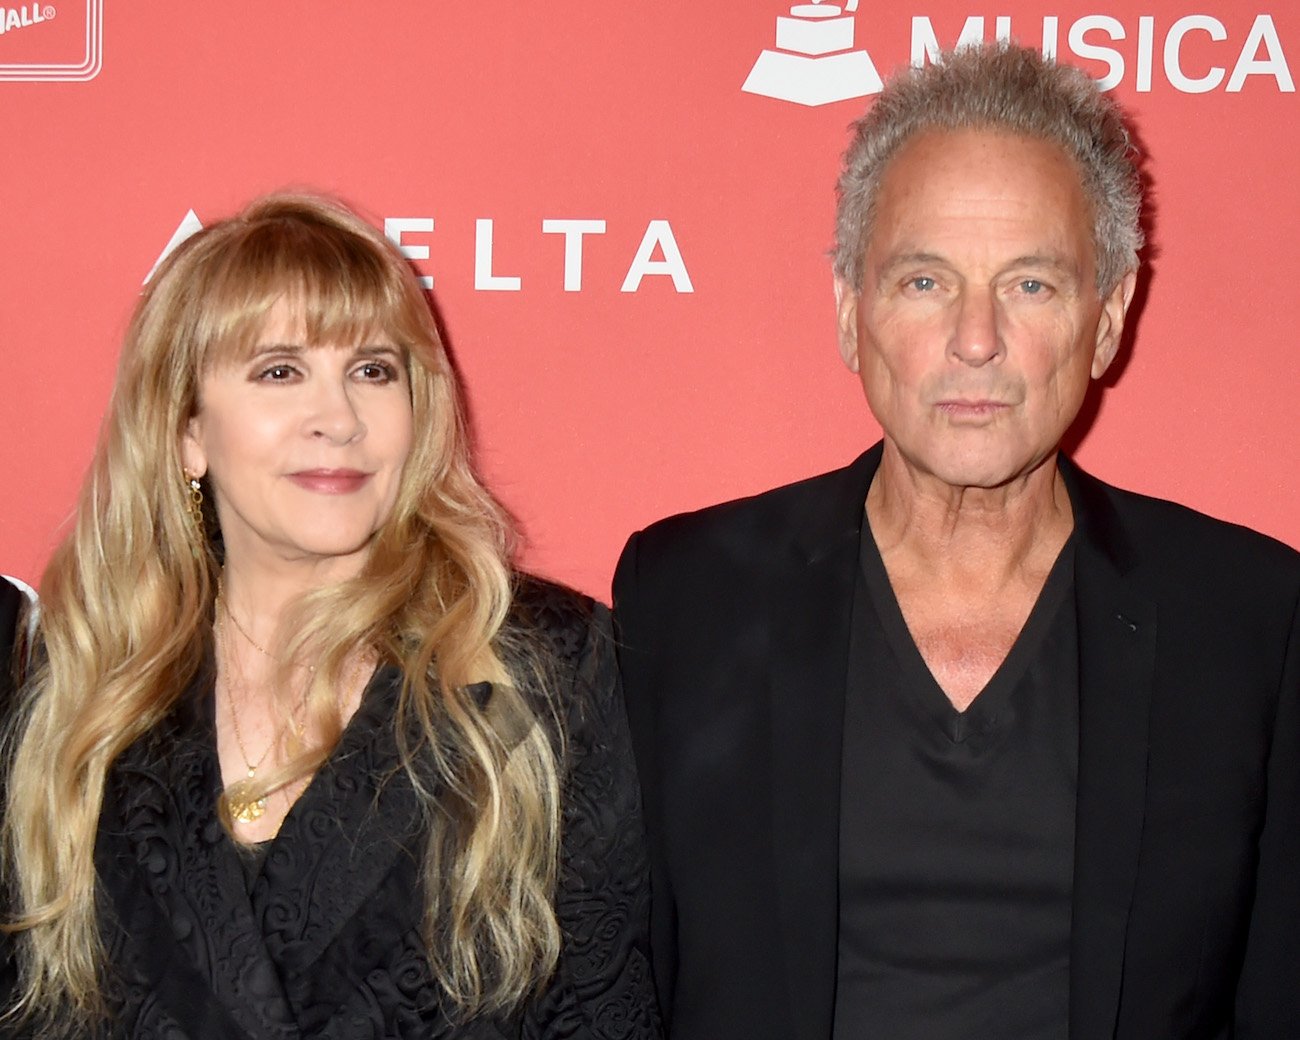 Stevie Nicks and Lindsay Buckingham at MusiCares Person of the Year ceremony.